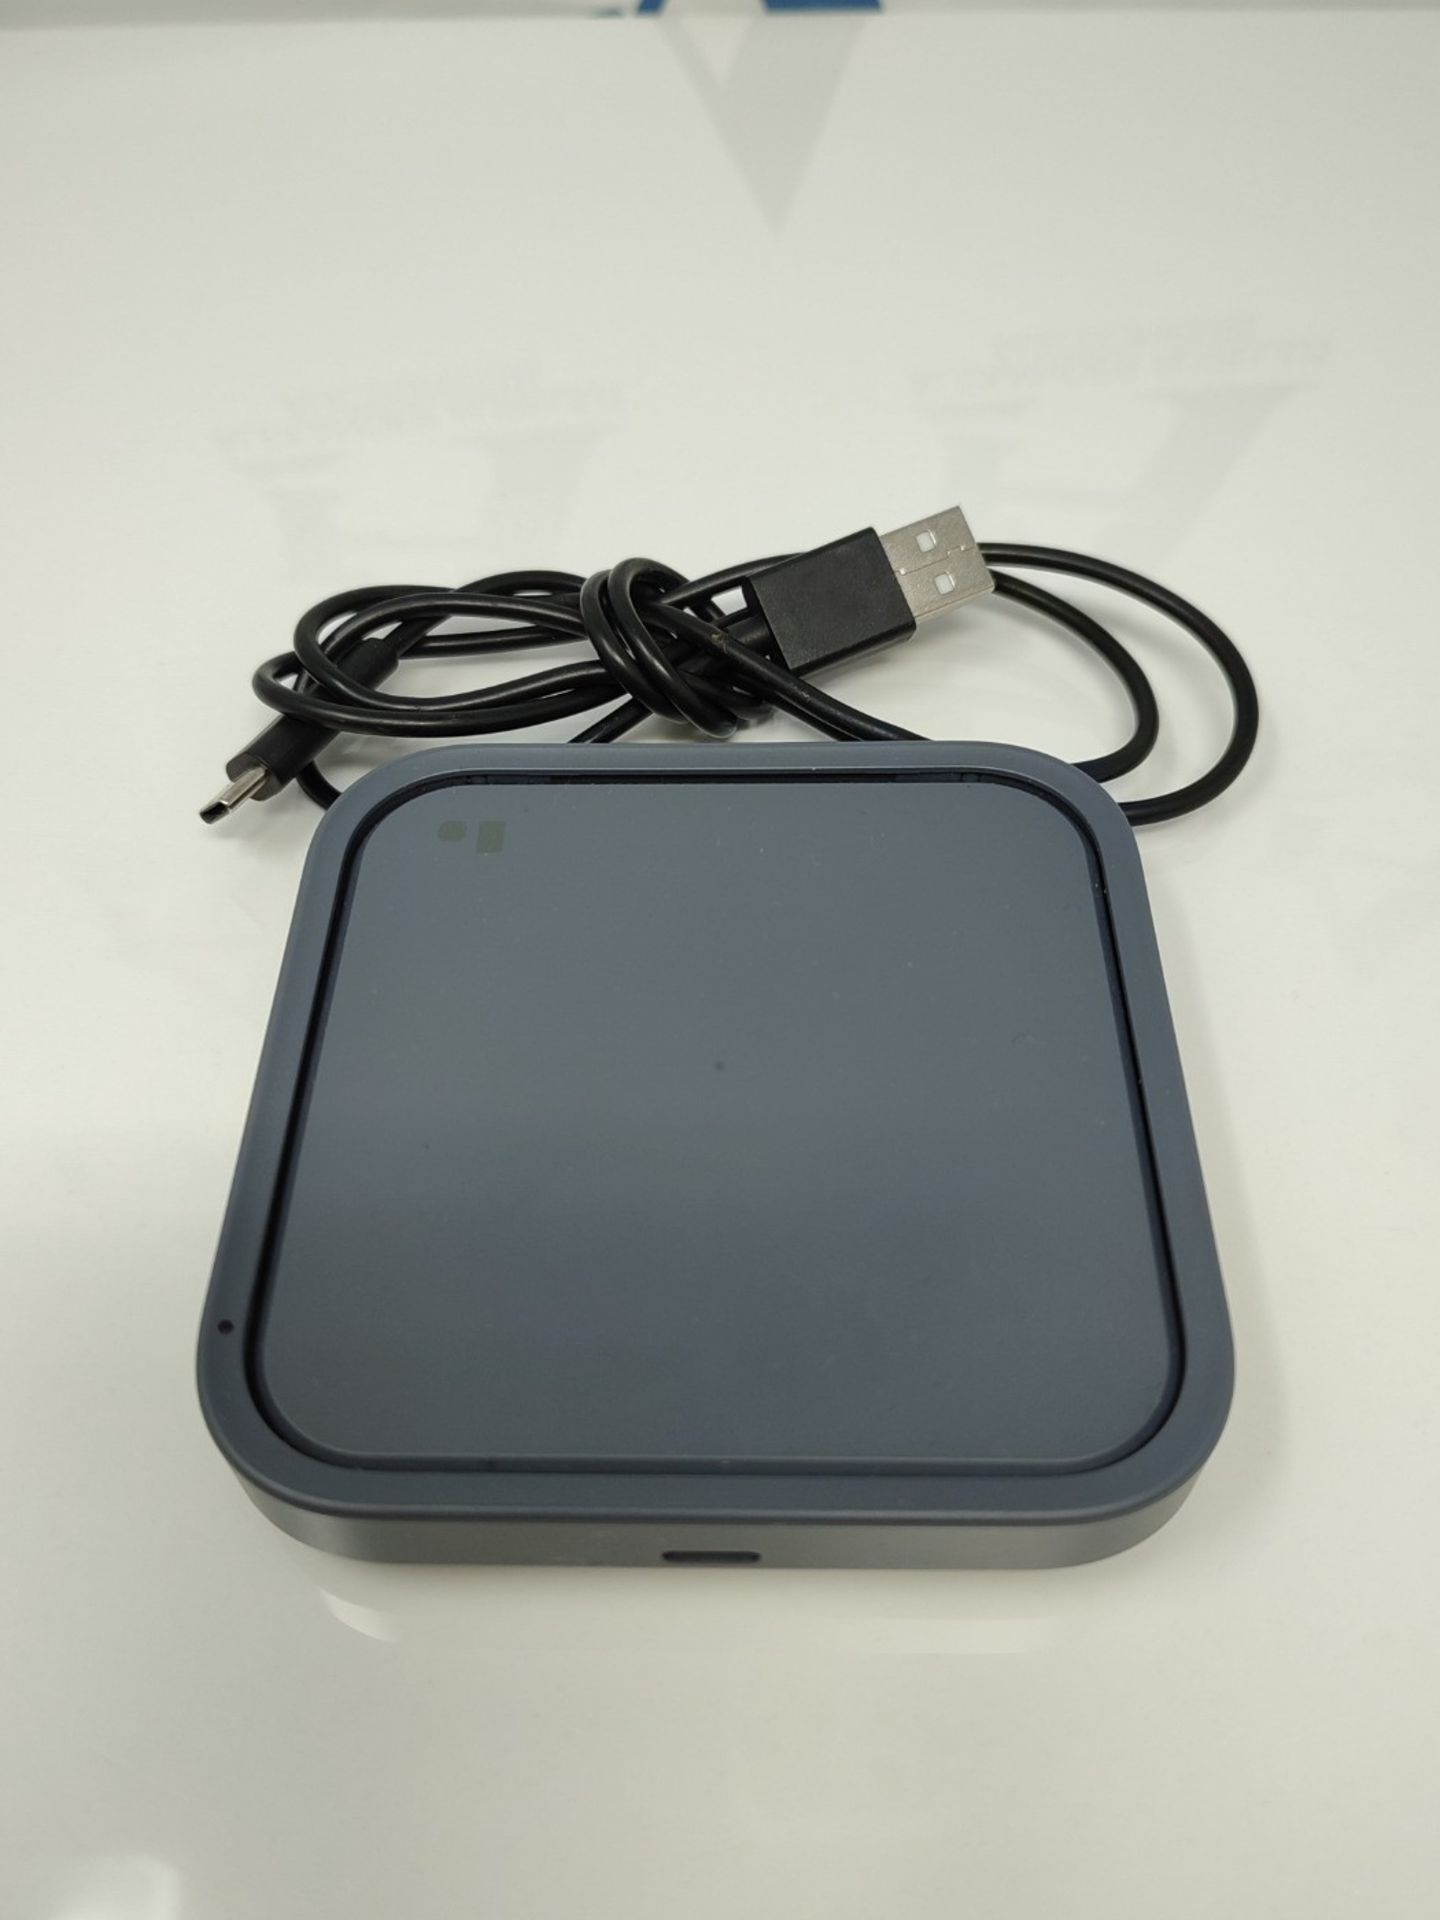 Samsung Galaxy Official Wireless Charging Pad, Black - Image 2 of 2